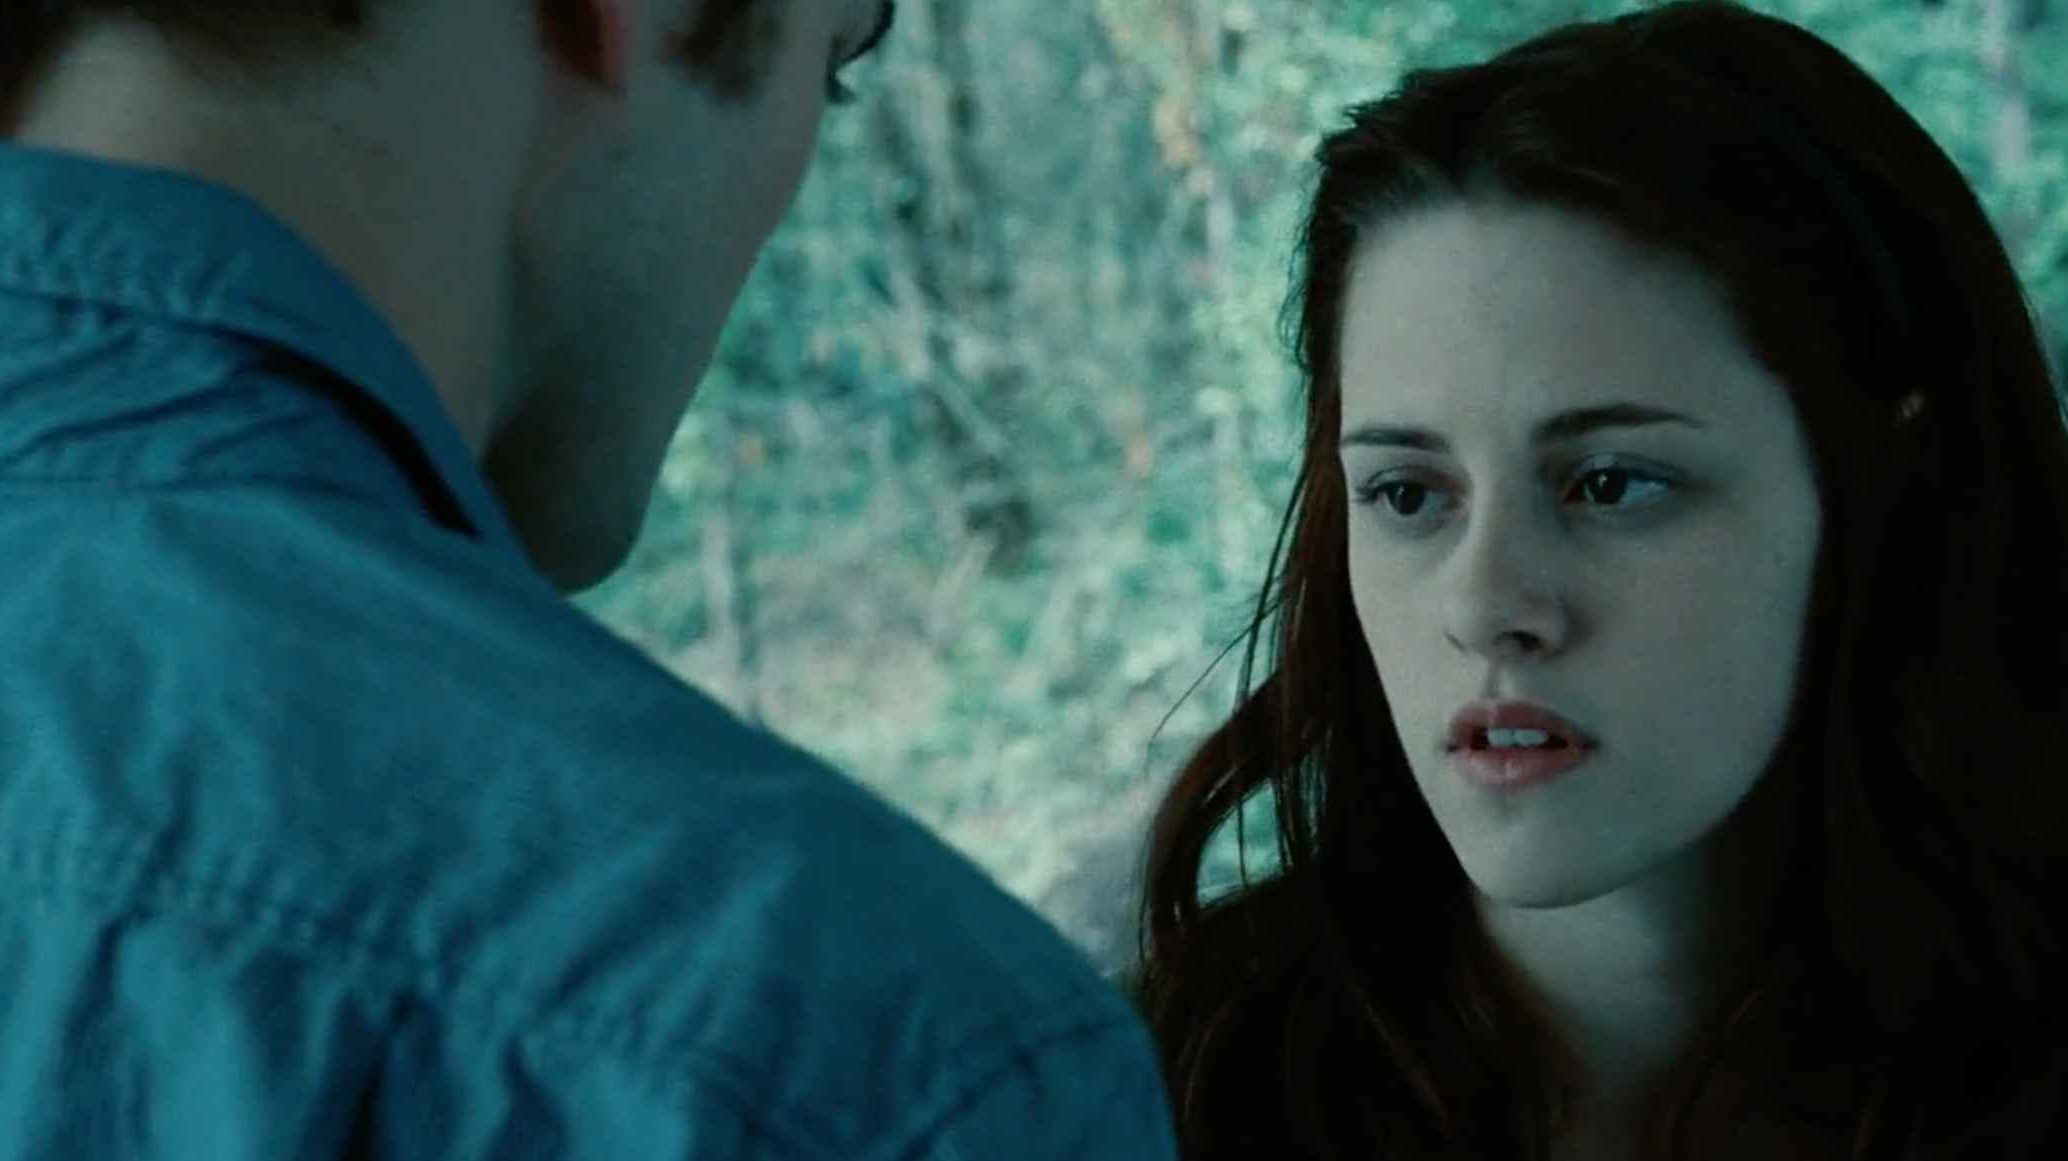 Bella Swan and Edward Cullen together - Watch Twilight Online Free